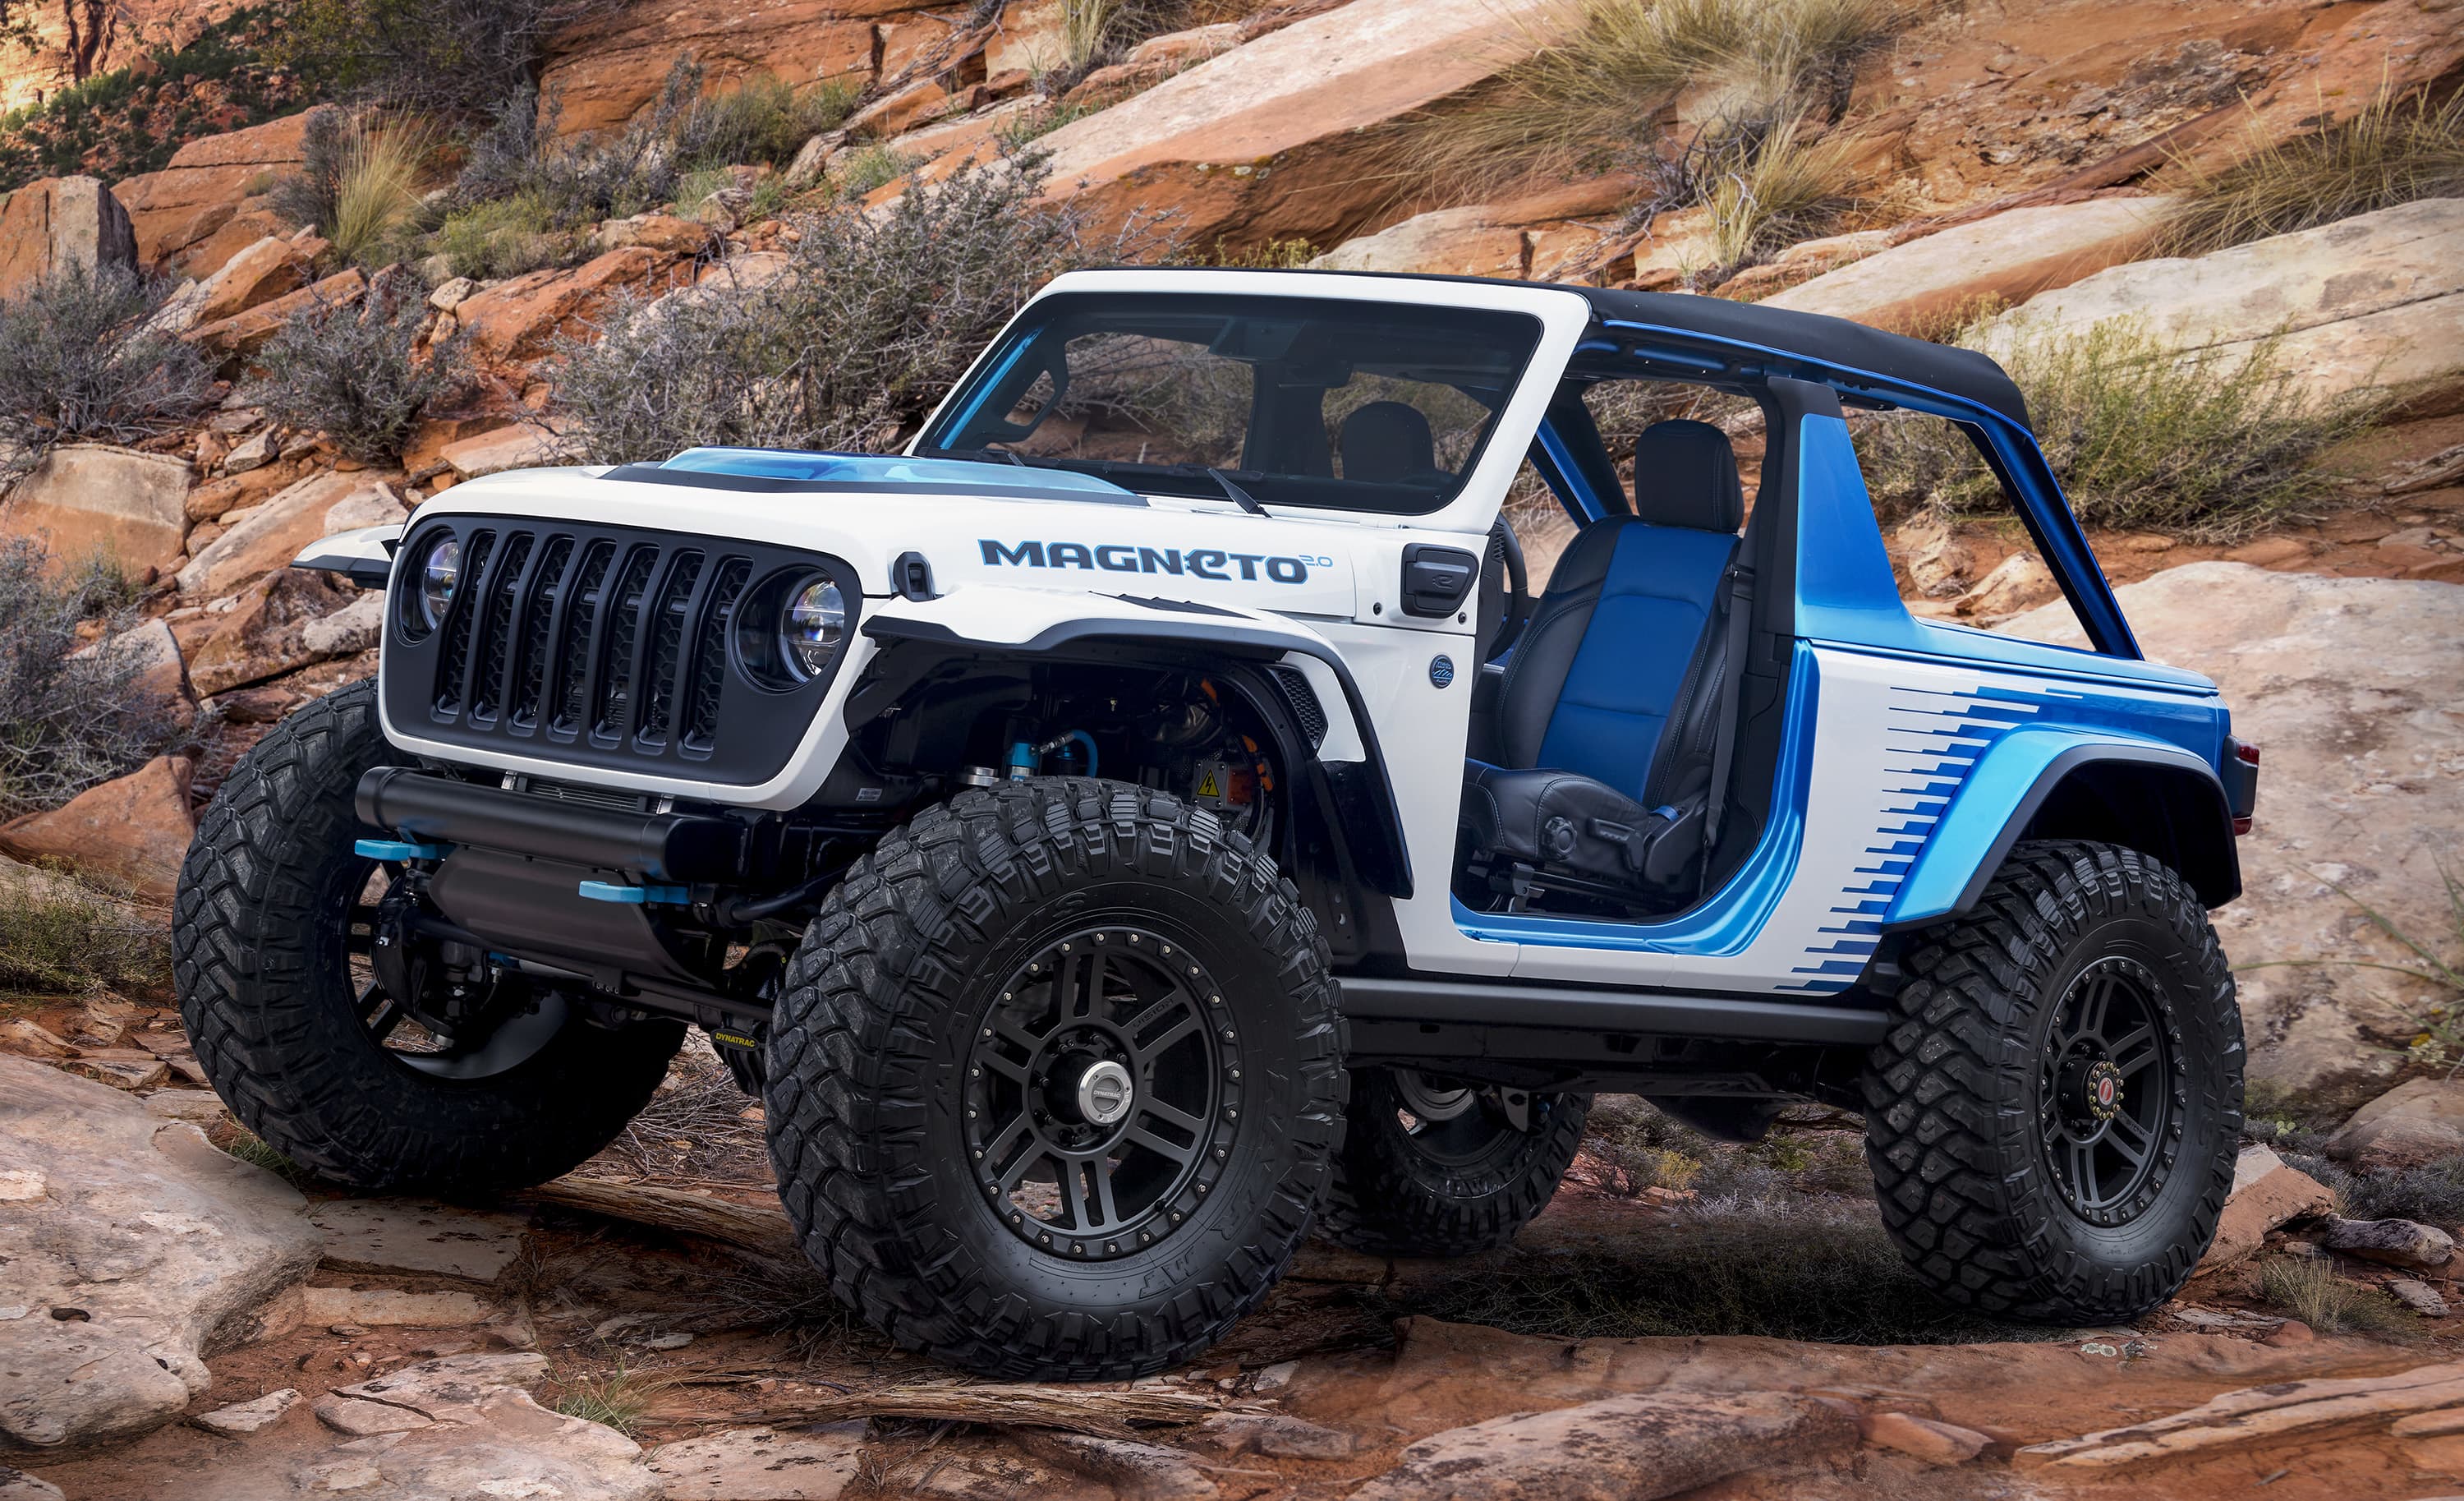 Jeep says its new electric Wrangler SUV concept is as fast as a Tesla